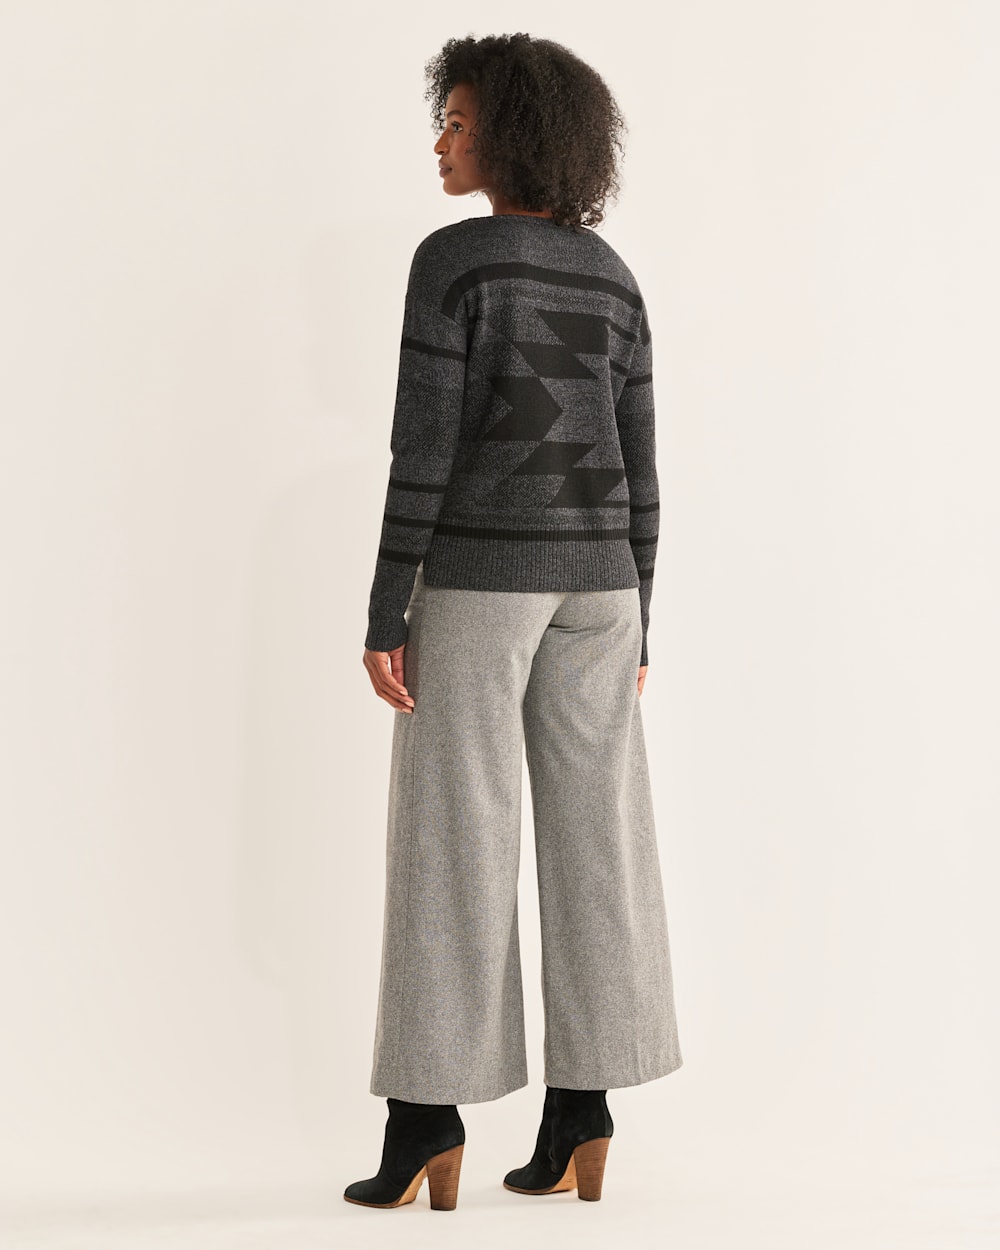 ALTERNATE VIEW OF WOMEN'S SIDE-BUTTON MERINO SWEATER IN CHARCOAL HEATHER/BLACK image number 4